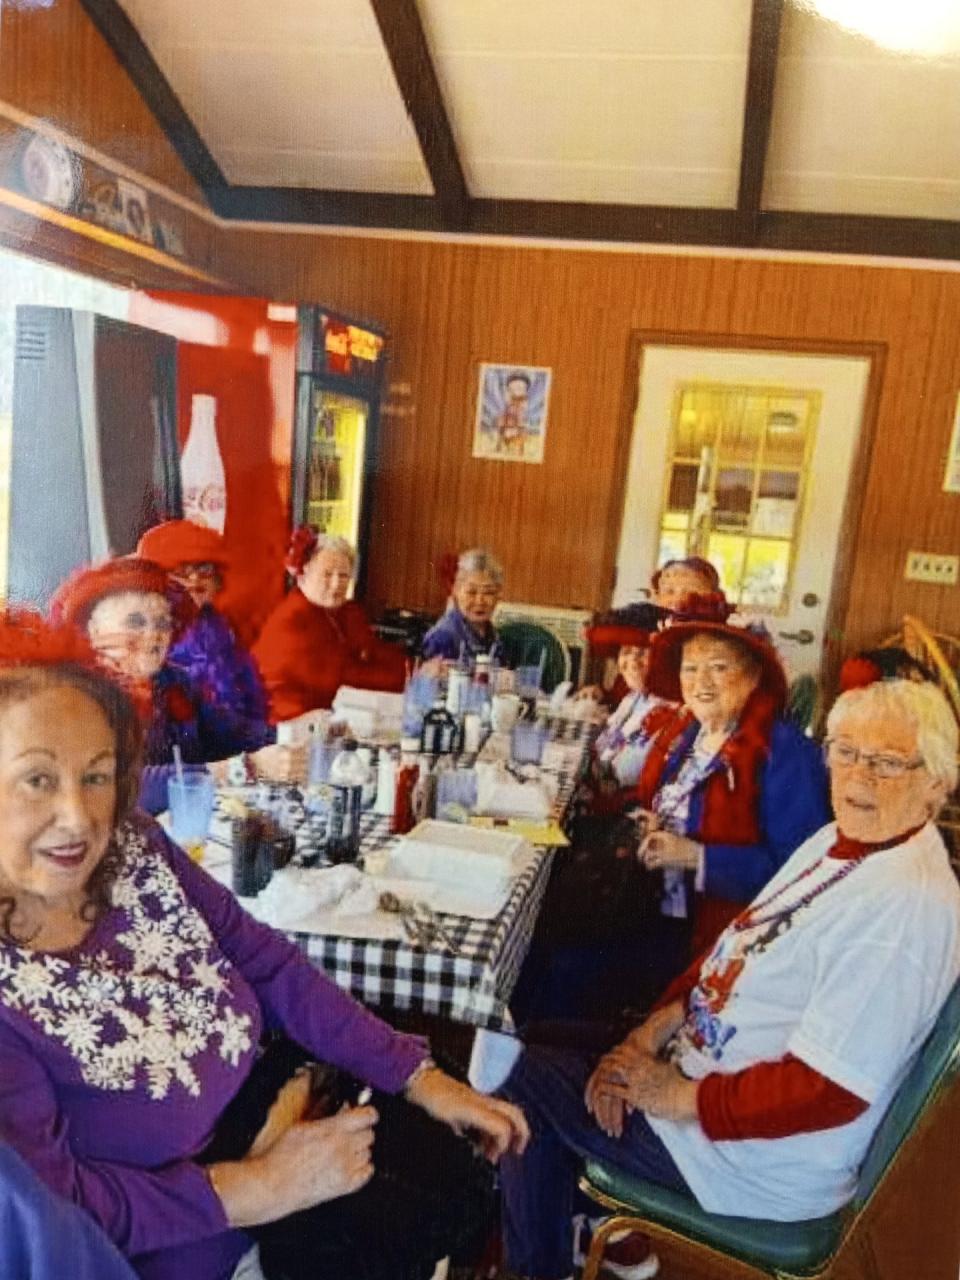 The Bette Boop Babes Chapter of the Red Hat Society had lunch recently to welcome the new owner of the former Cherry Ridge Airport Restaurant outside Honesdale, now known as the Betty Boops Airport Cafe. From left are members Marianne Vassallo, Vice Queen Judy Maneval, Karen Vasella, Carol MacLean, Lee DeKorte, Arlene Battista, Queen Mother Dee Cullen and Treasurer Karen McGhee.